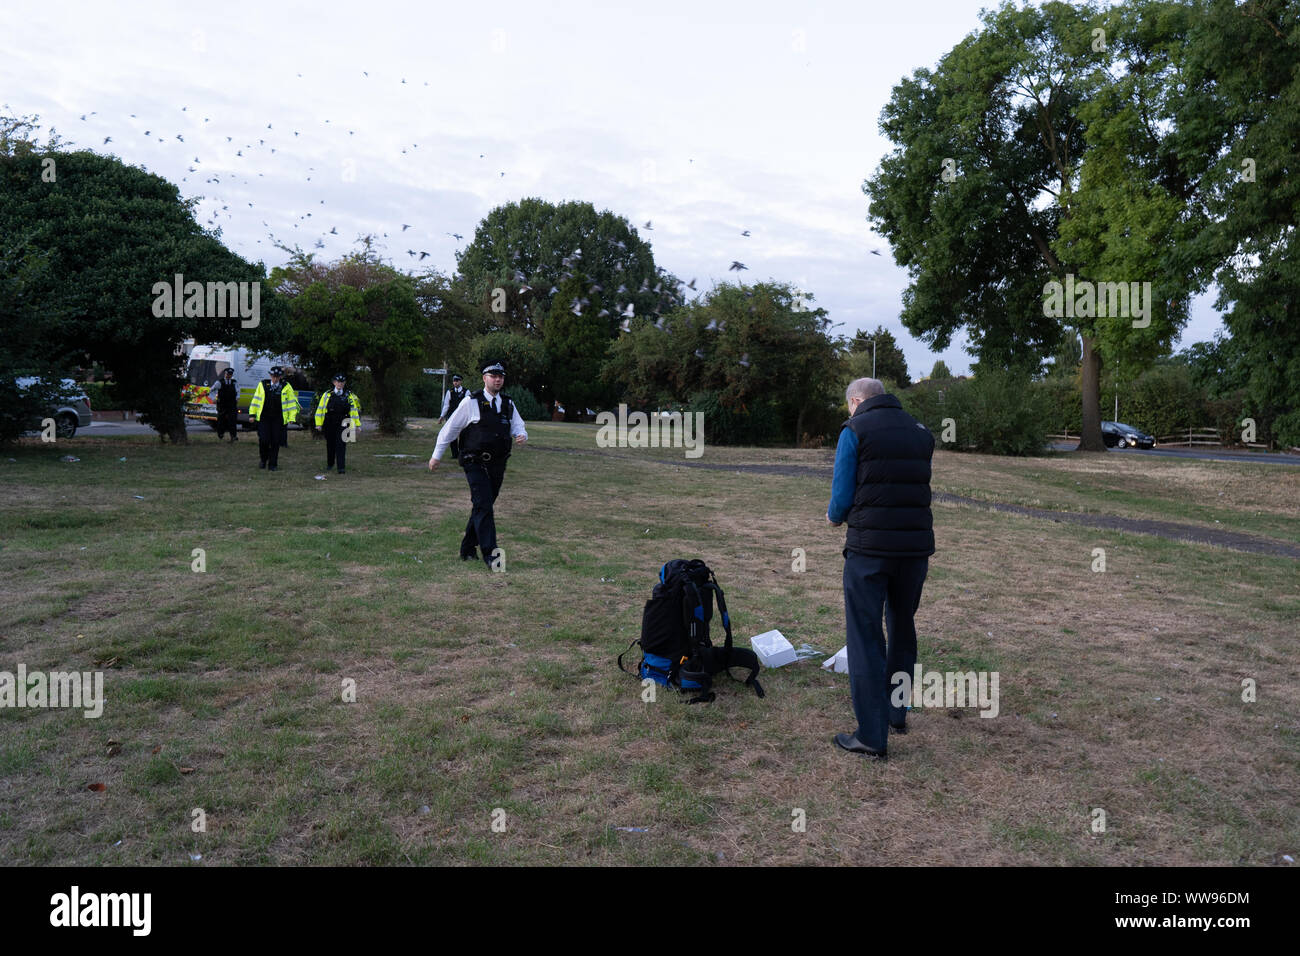 London, UK. 13th Sep, 2019. Police are seen arriving at the site of a protester flying a drone near to Heathrow Airport.Heathrow Pause protesters are seen attempting to fly drones next to Heathrow Airport. Police were called by the protesters to alert the police about the location of the attacks. The police arrested the protesters and took them to nearby police cells. The drones did not fly more than a few feet and unconfirmed reports suggest that signal jammers were used to ensure that the drones were unable to pose any real threat to the airport. Credit: SOPA Images Limited/Alamy Live News Stock Photo